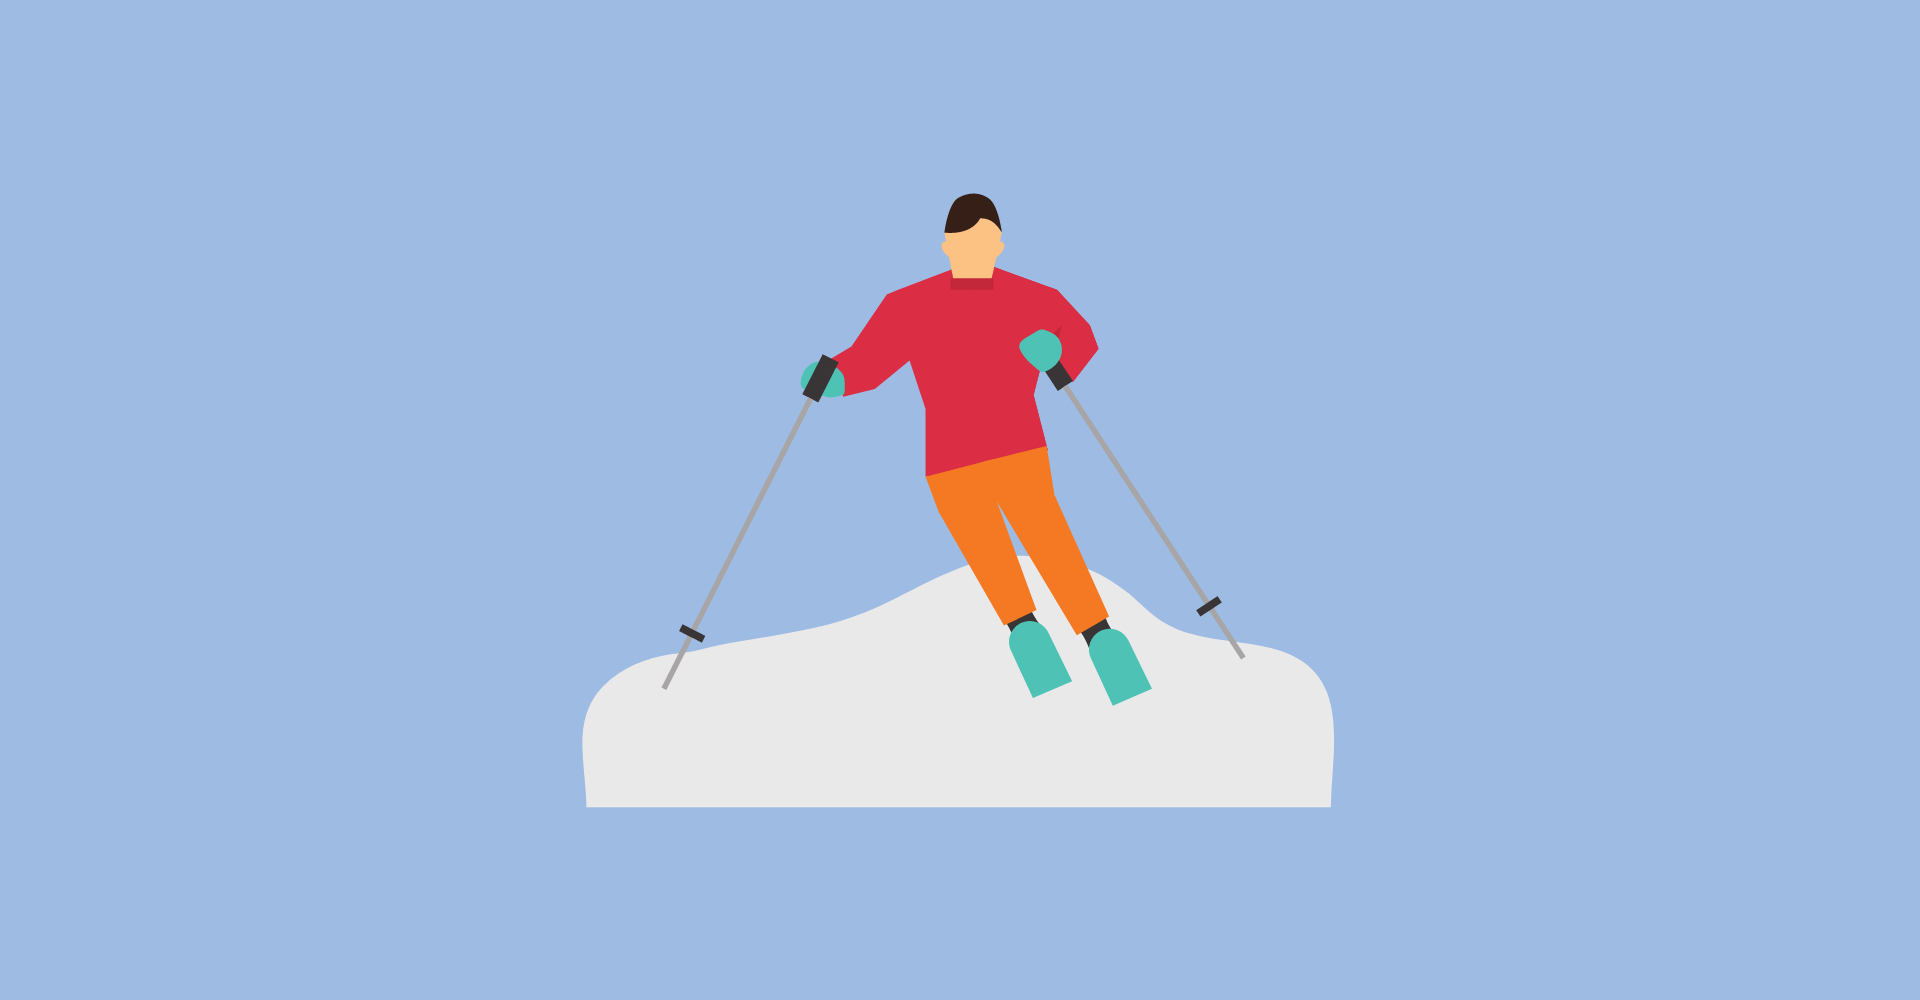 illustrated man skiing on snow on blue background for skiing gift guide article